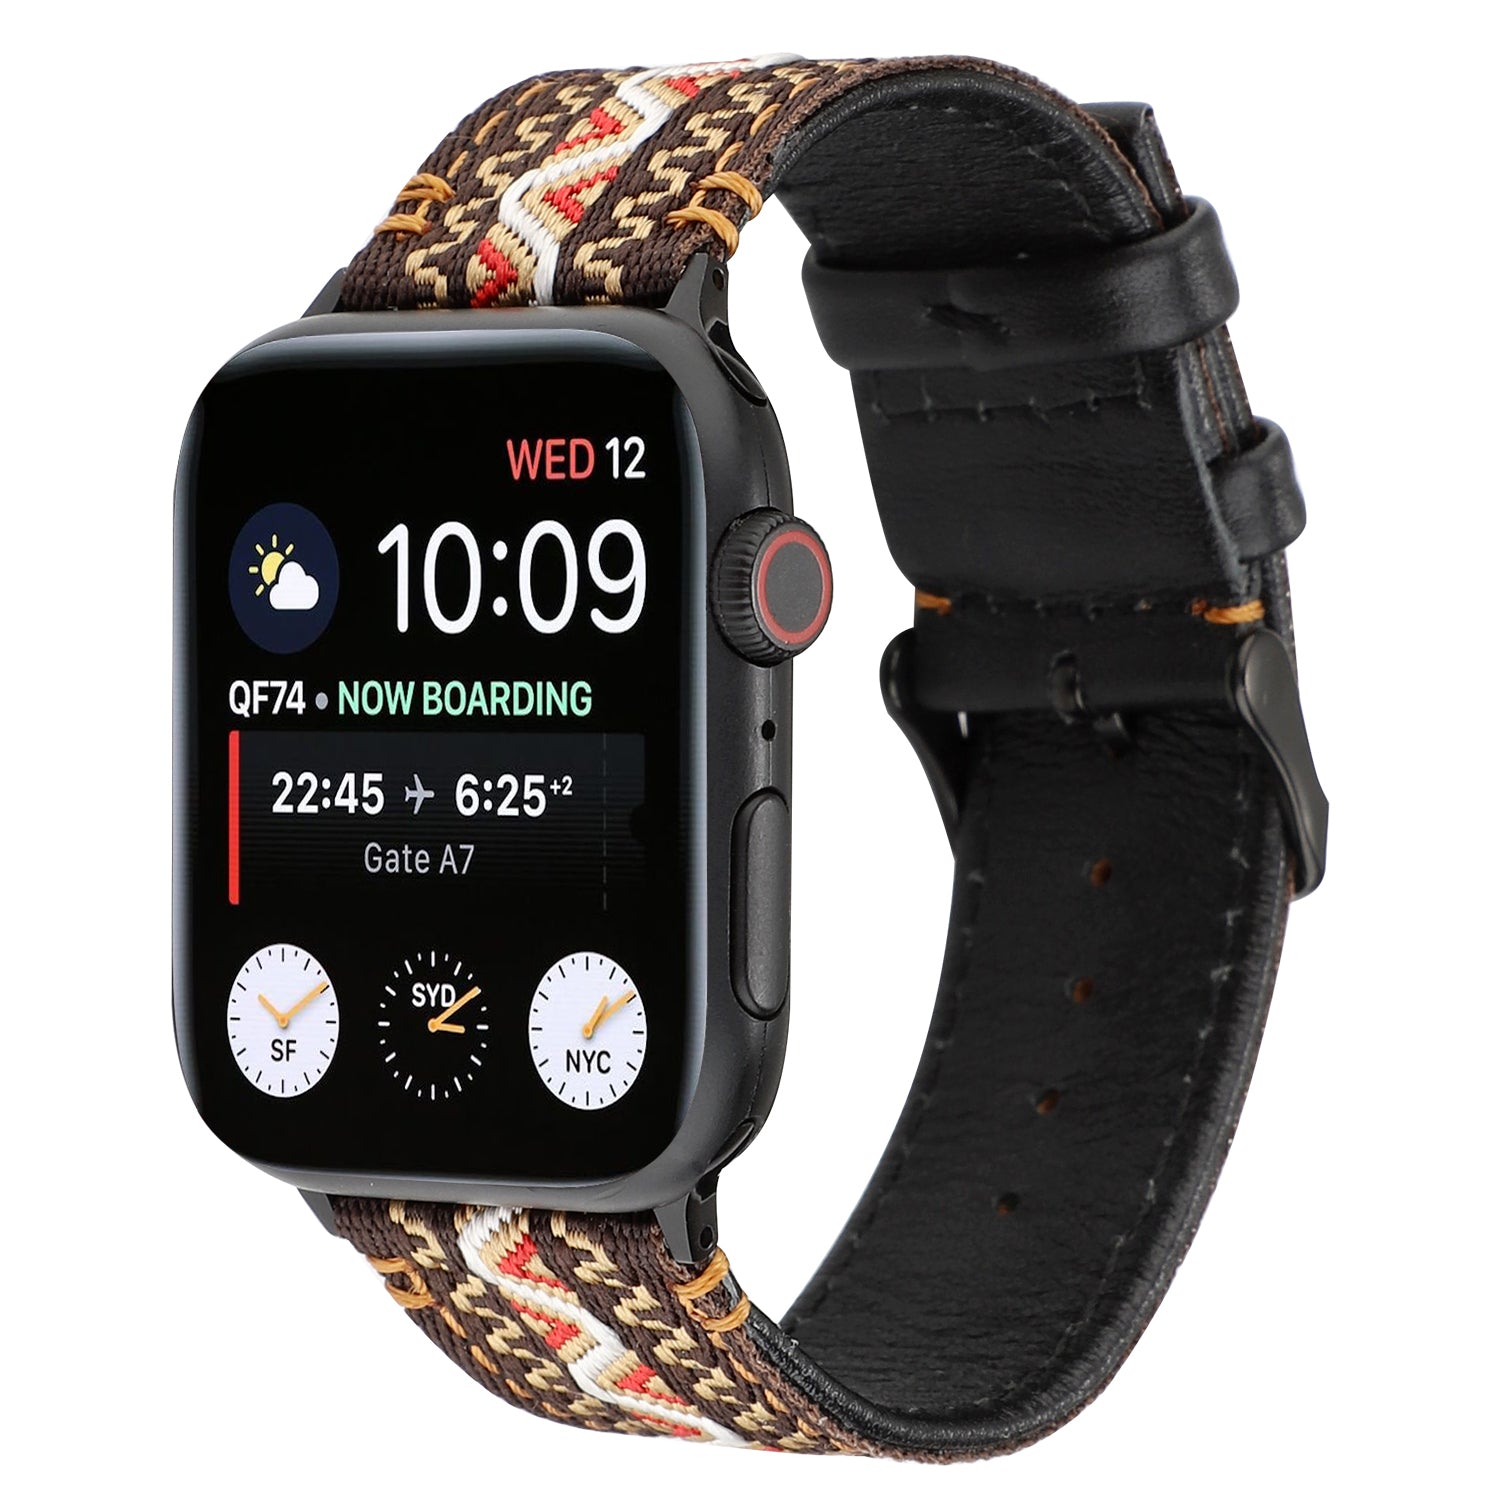 Boho-DreamWeave Leather Band For Apple – Multiple Fancy Available Watch Colors Bands